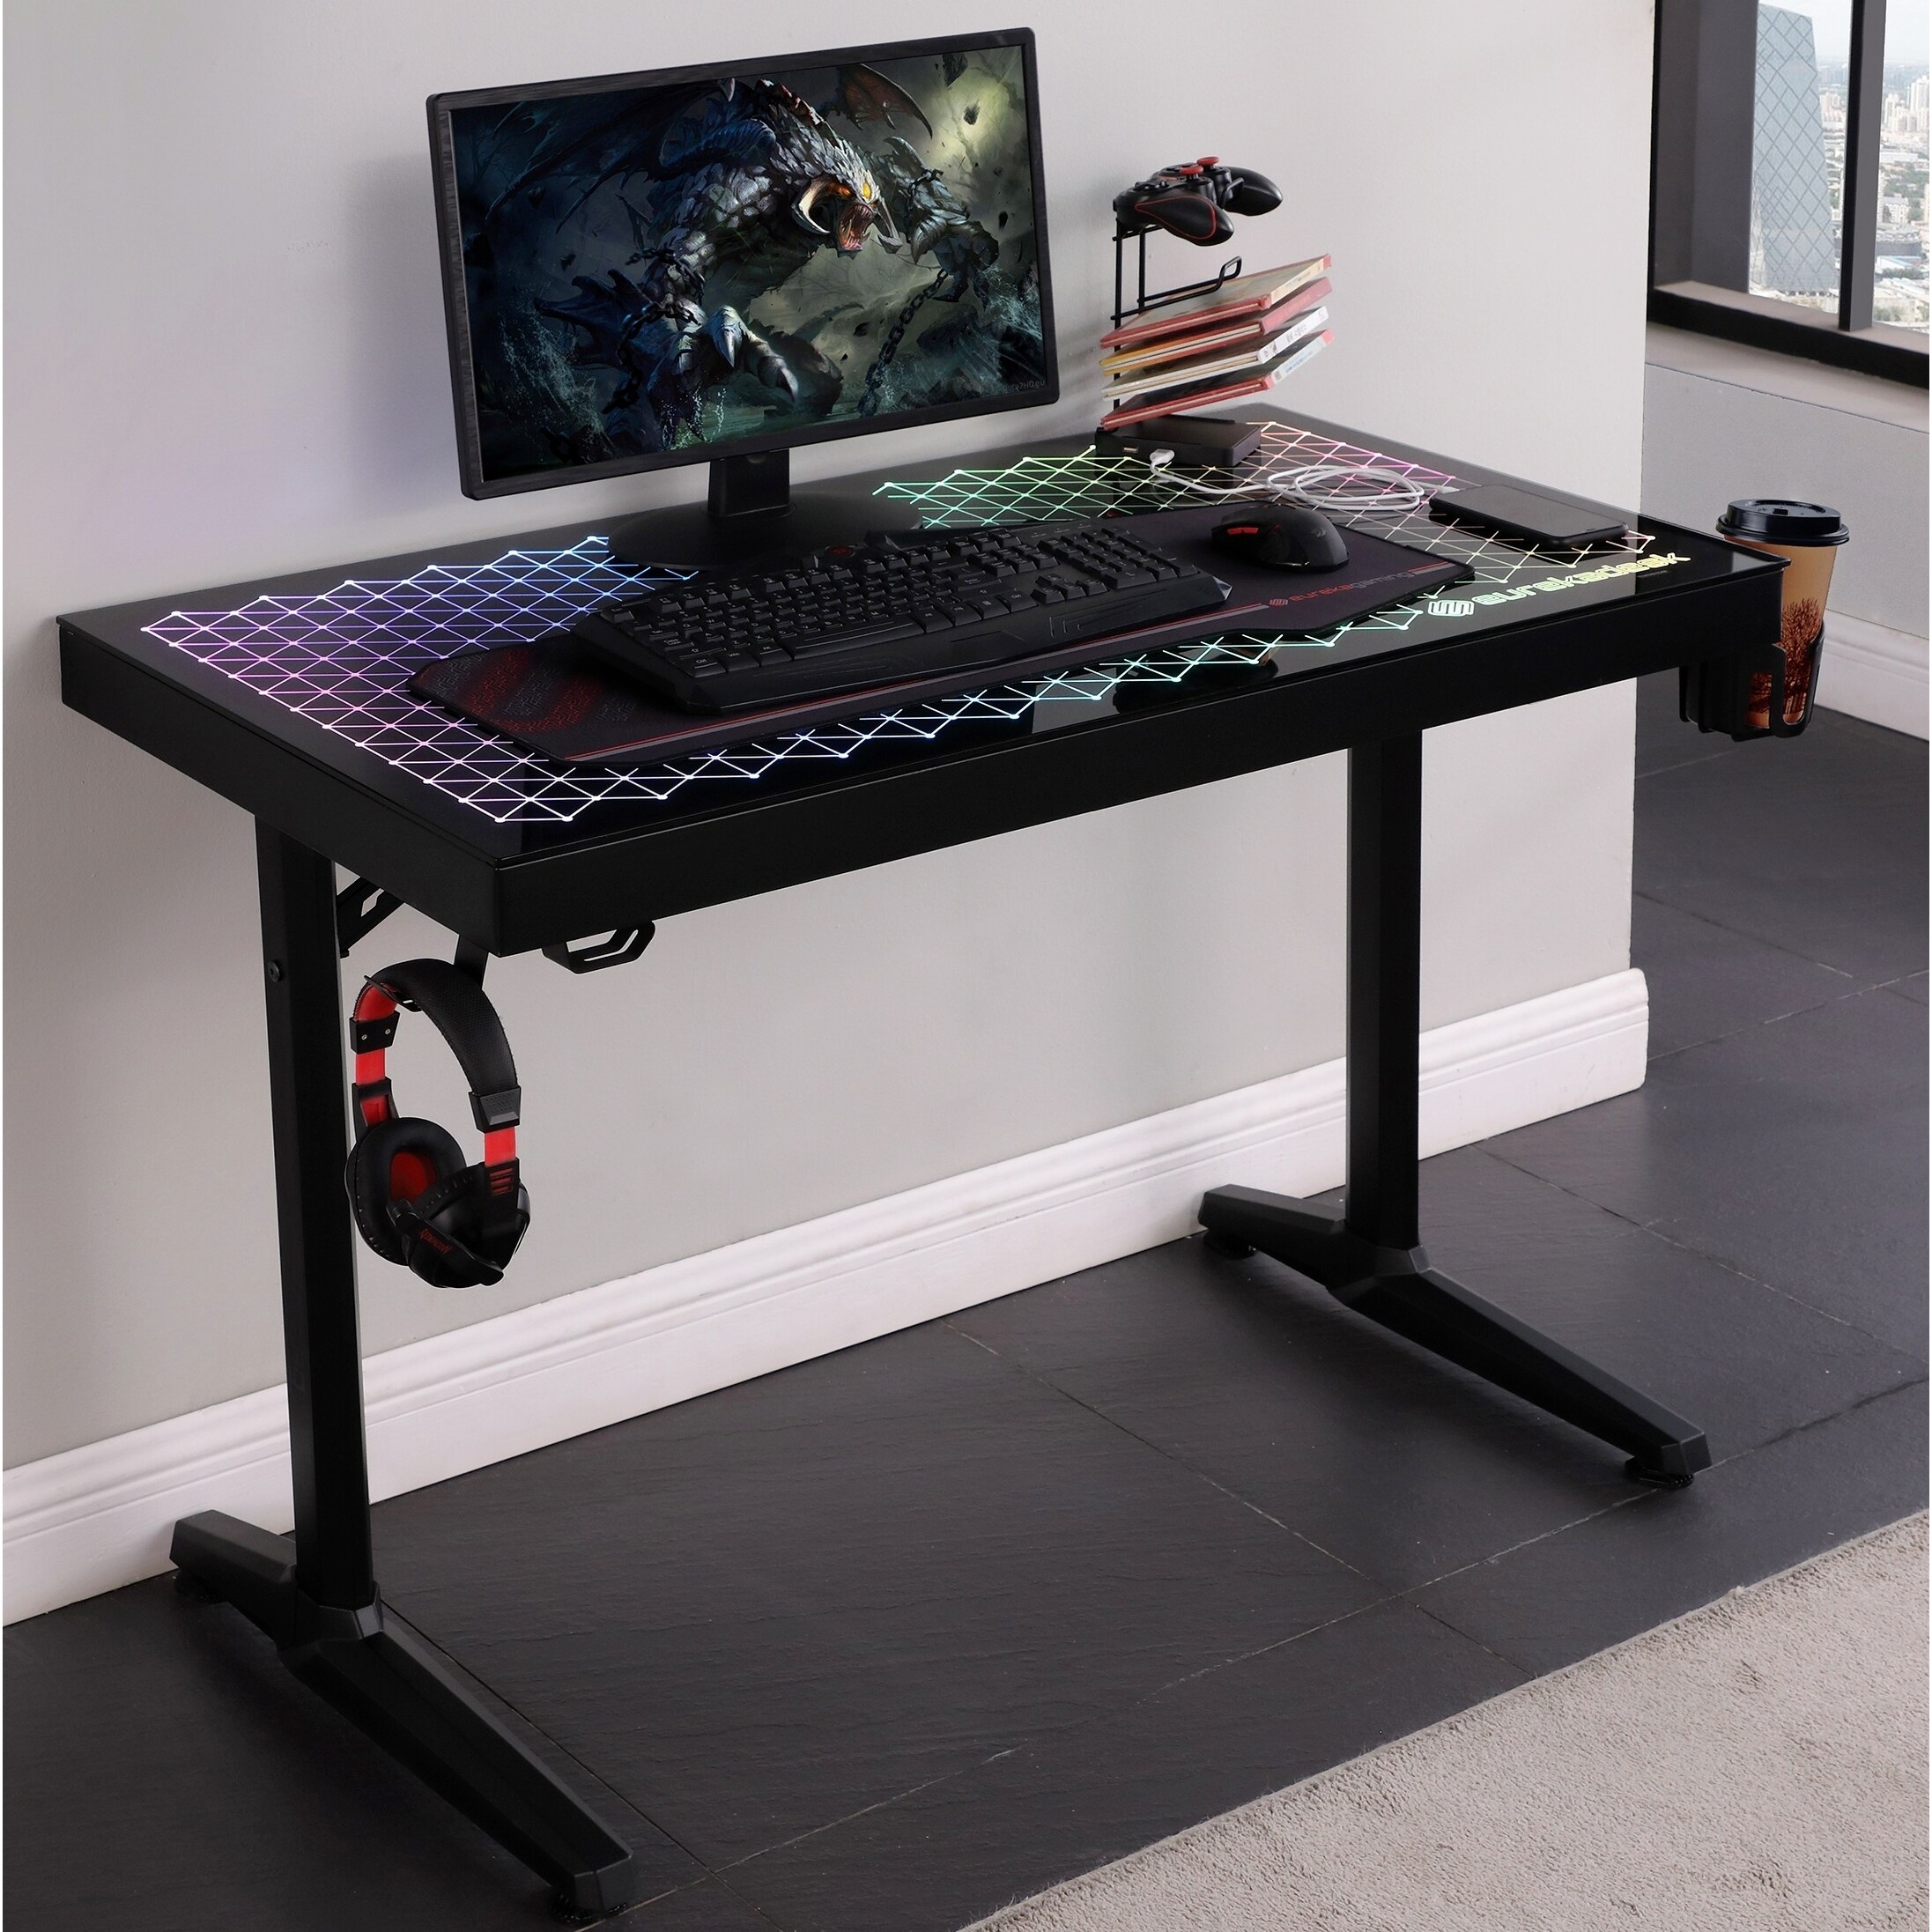  EUREKA ERGONOMIC 65 inch Electric Height Adjustable Gaming Desk  Standing Desk, Large Gaming Computer Desk with RGB LED Lights and Extended  Gaming Mouse mat for Gaming and Home Office,Black : Home